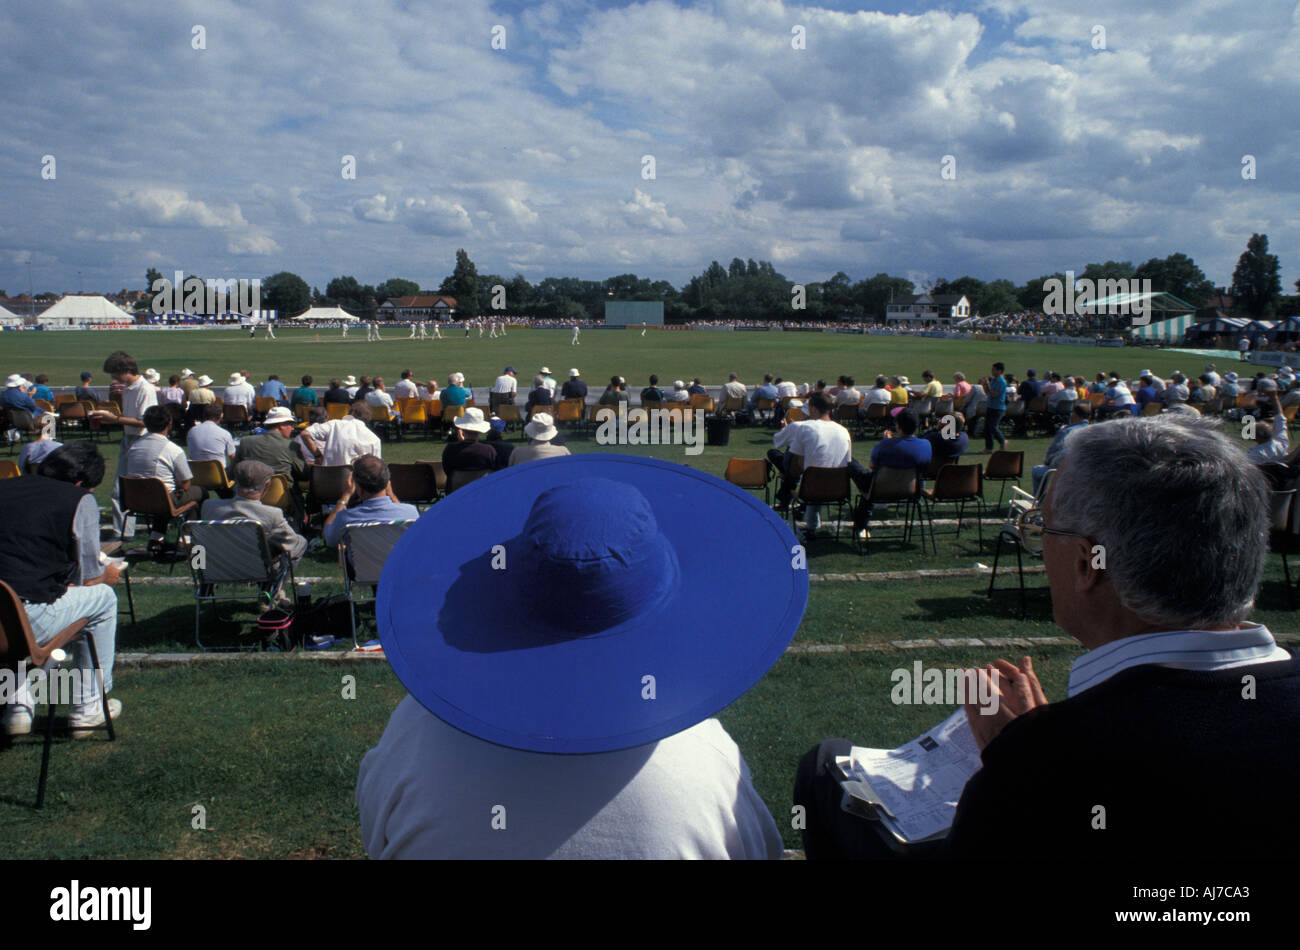 County Cricket Essex v Leicestershire. Southchurch Park. Southend-on-Sea. Essex. Luglio 1993. Foto Stock